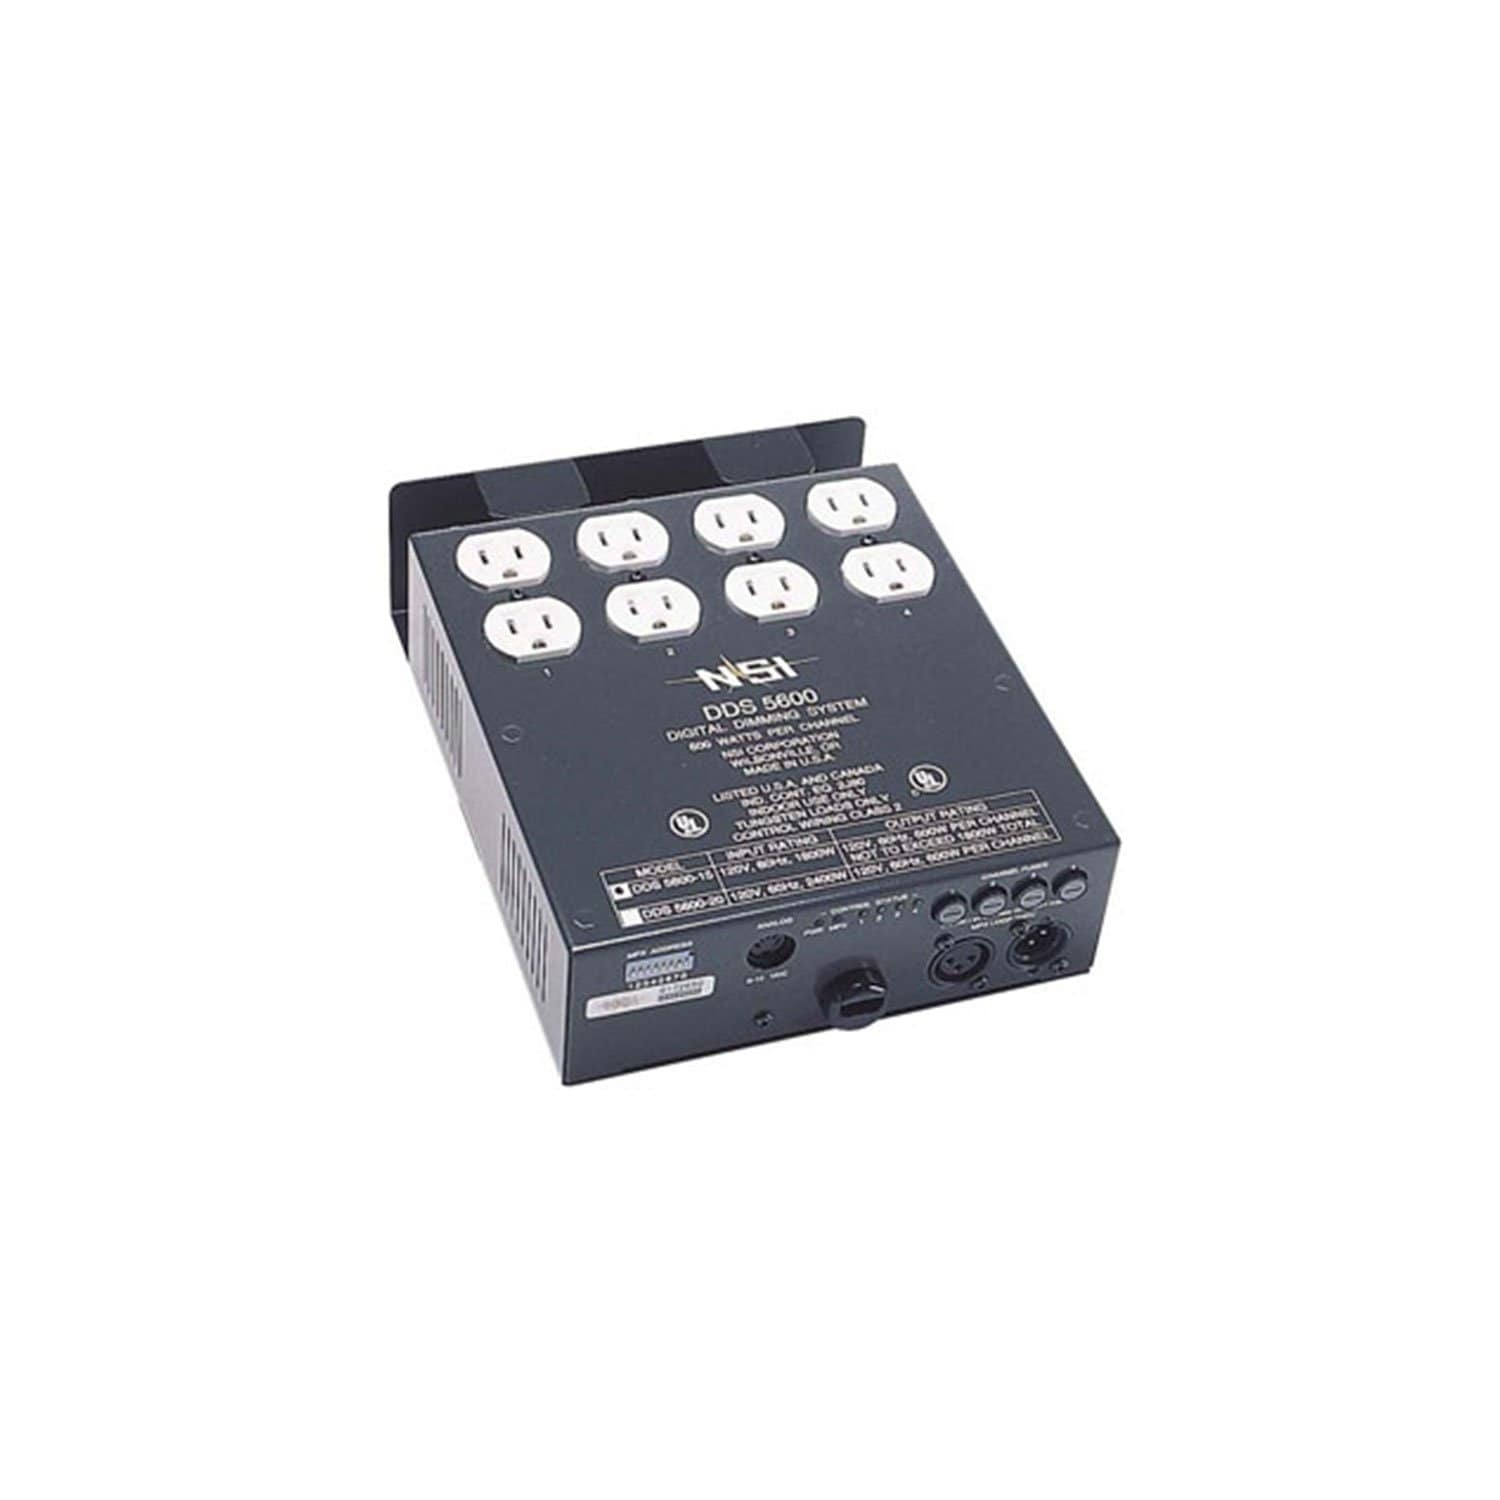 Leviton DDS 5600 4ch 600w DMX Dimmer Relay Pack - PSSL ProSound and Stage Lighting